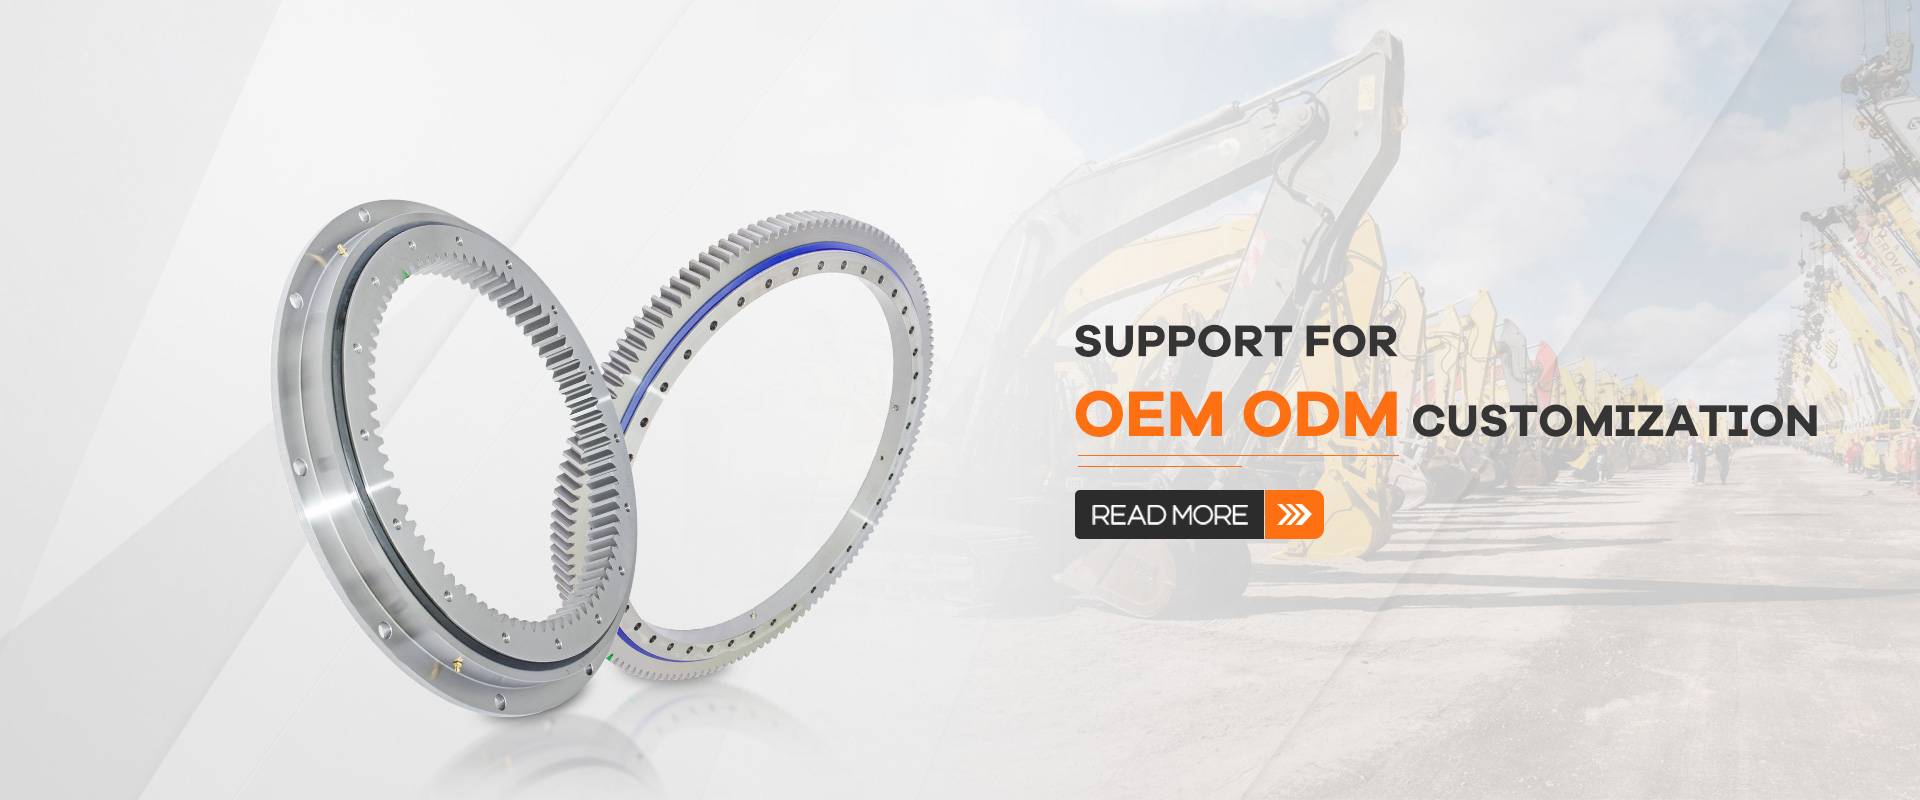 Support for OEM ODM customization